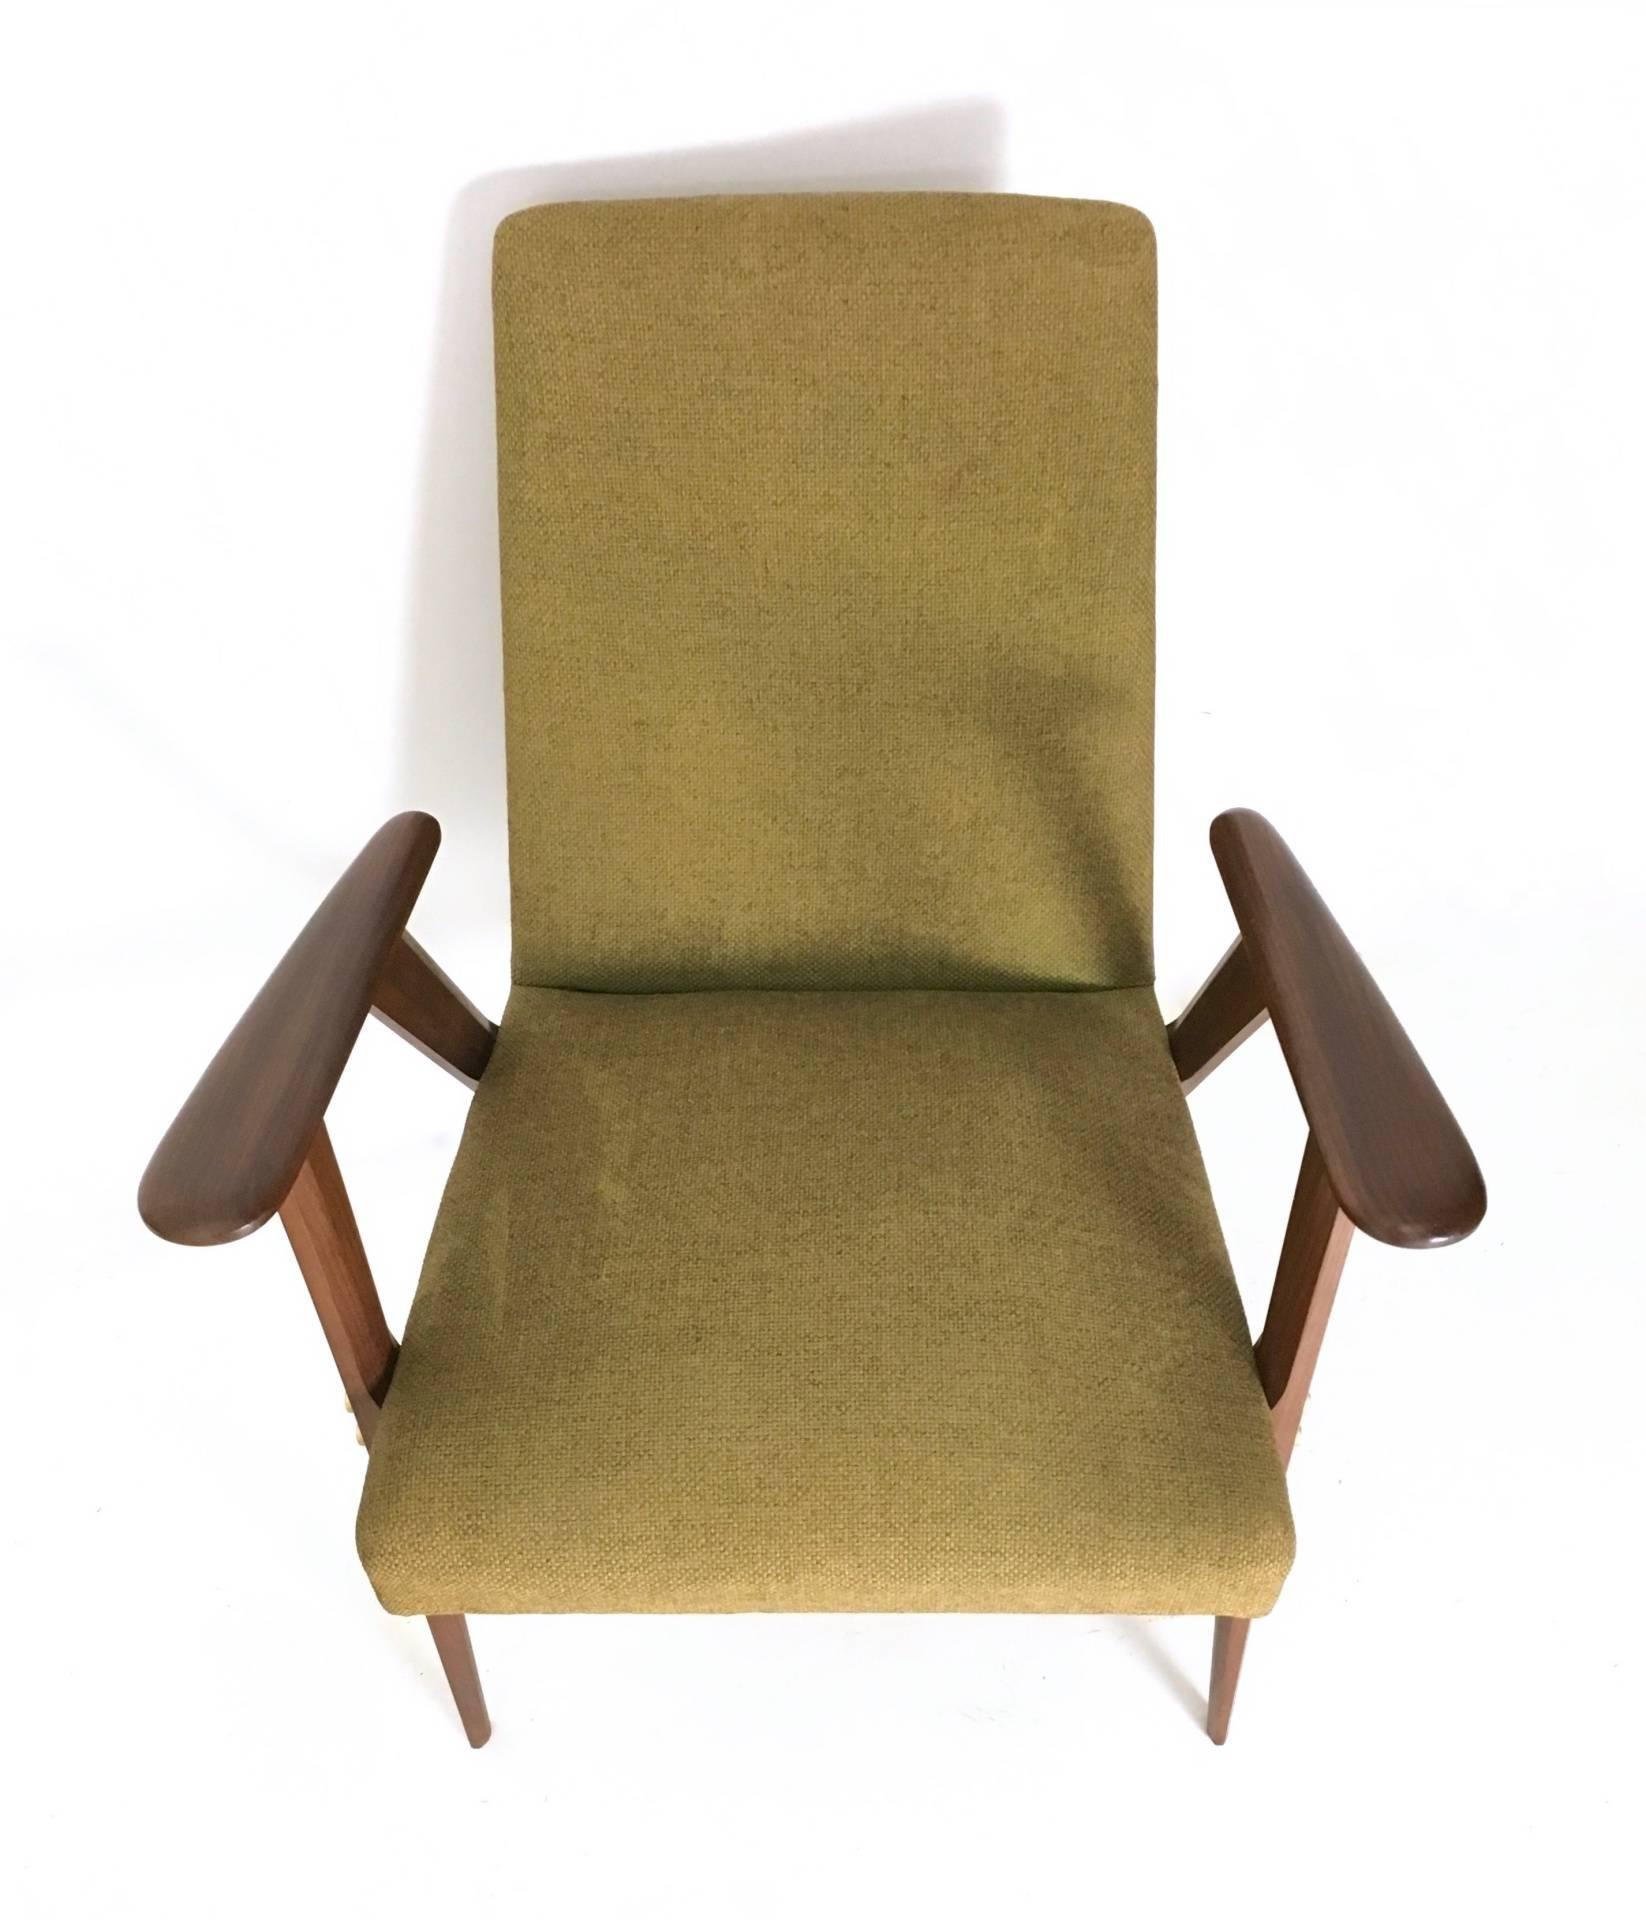 Brass Pair of Fabric and Wood Armchairs, Italy, 1950s